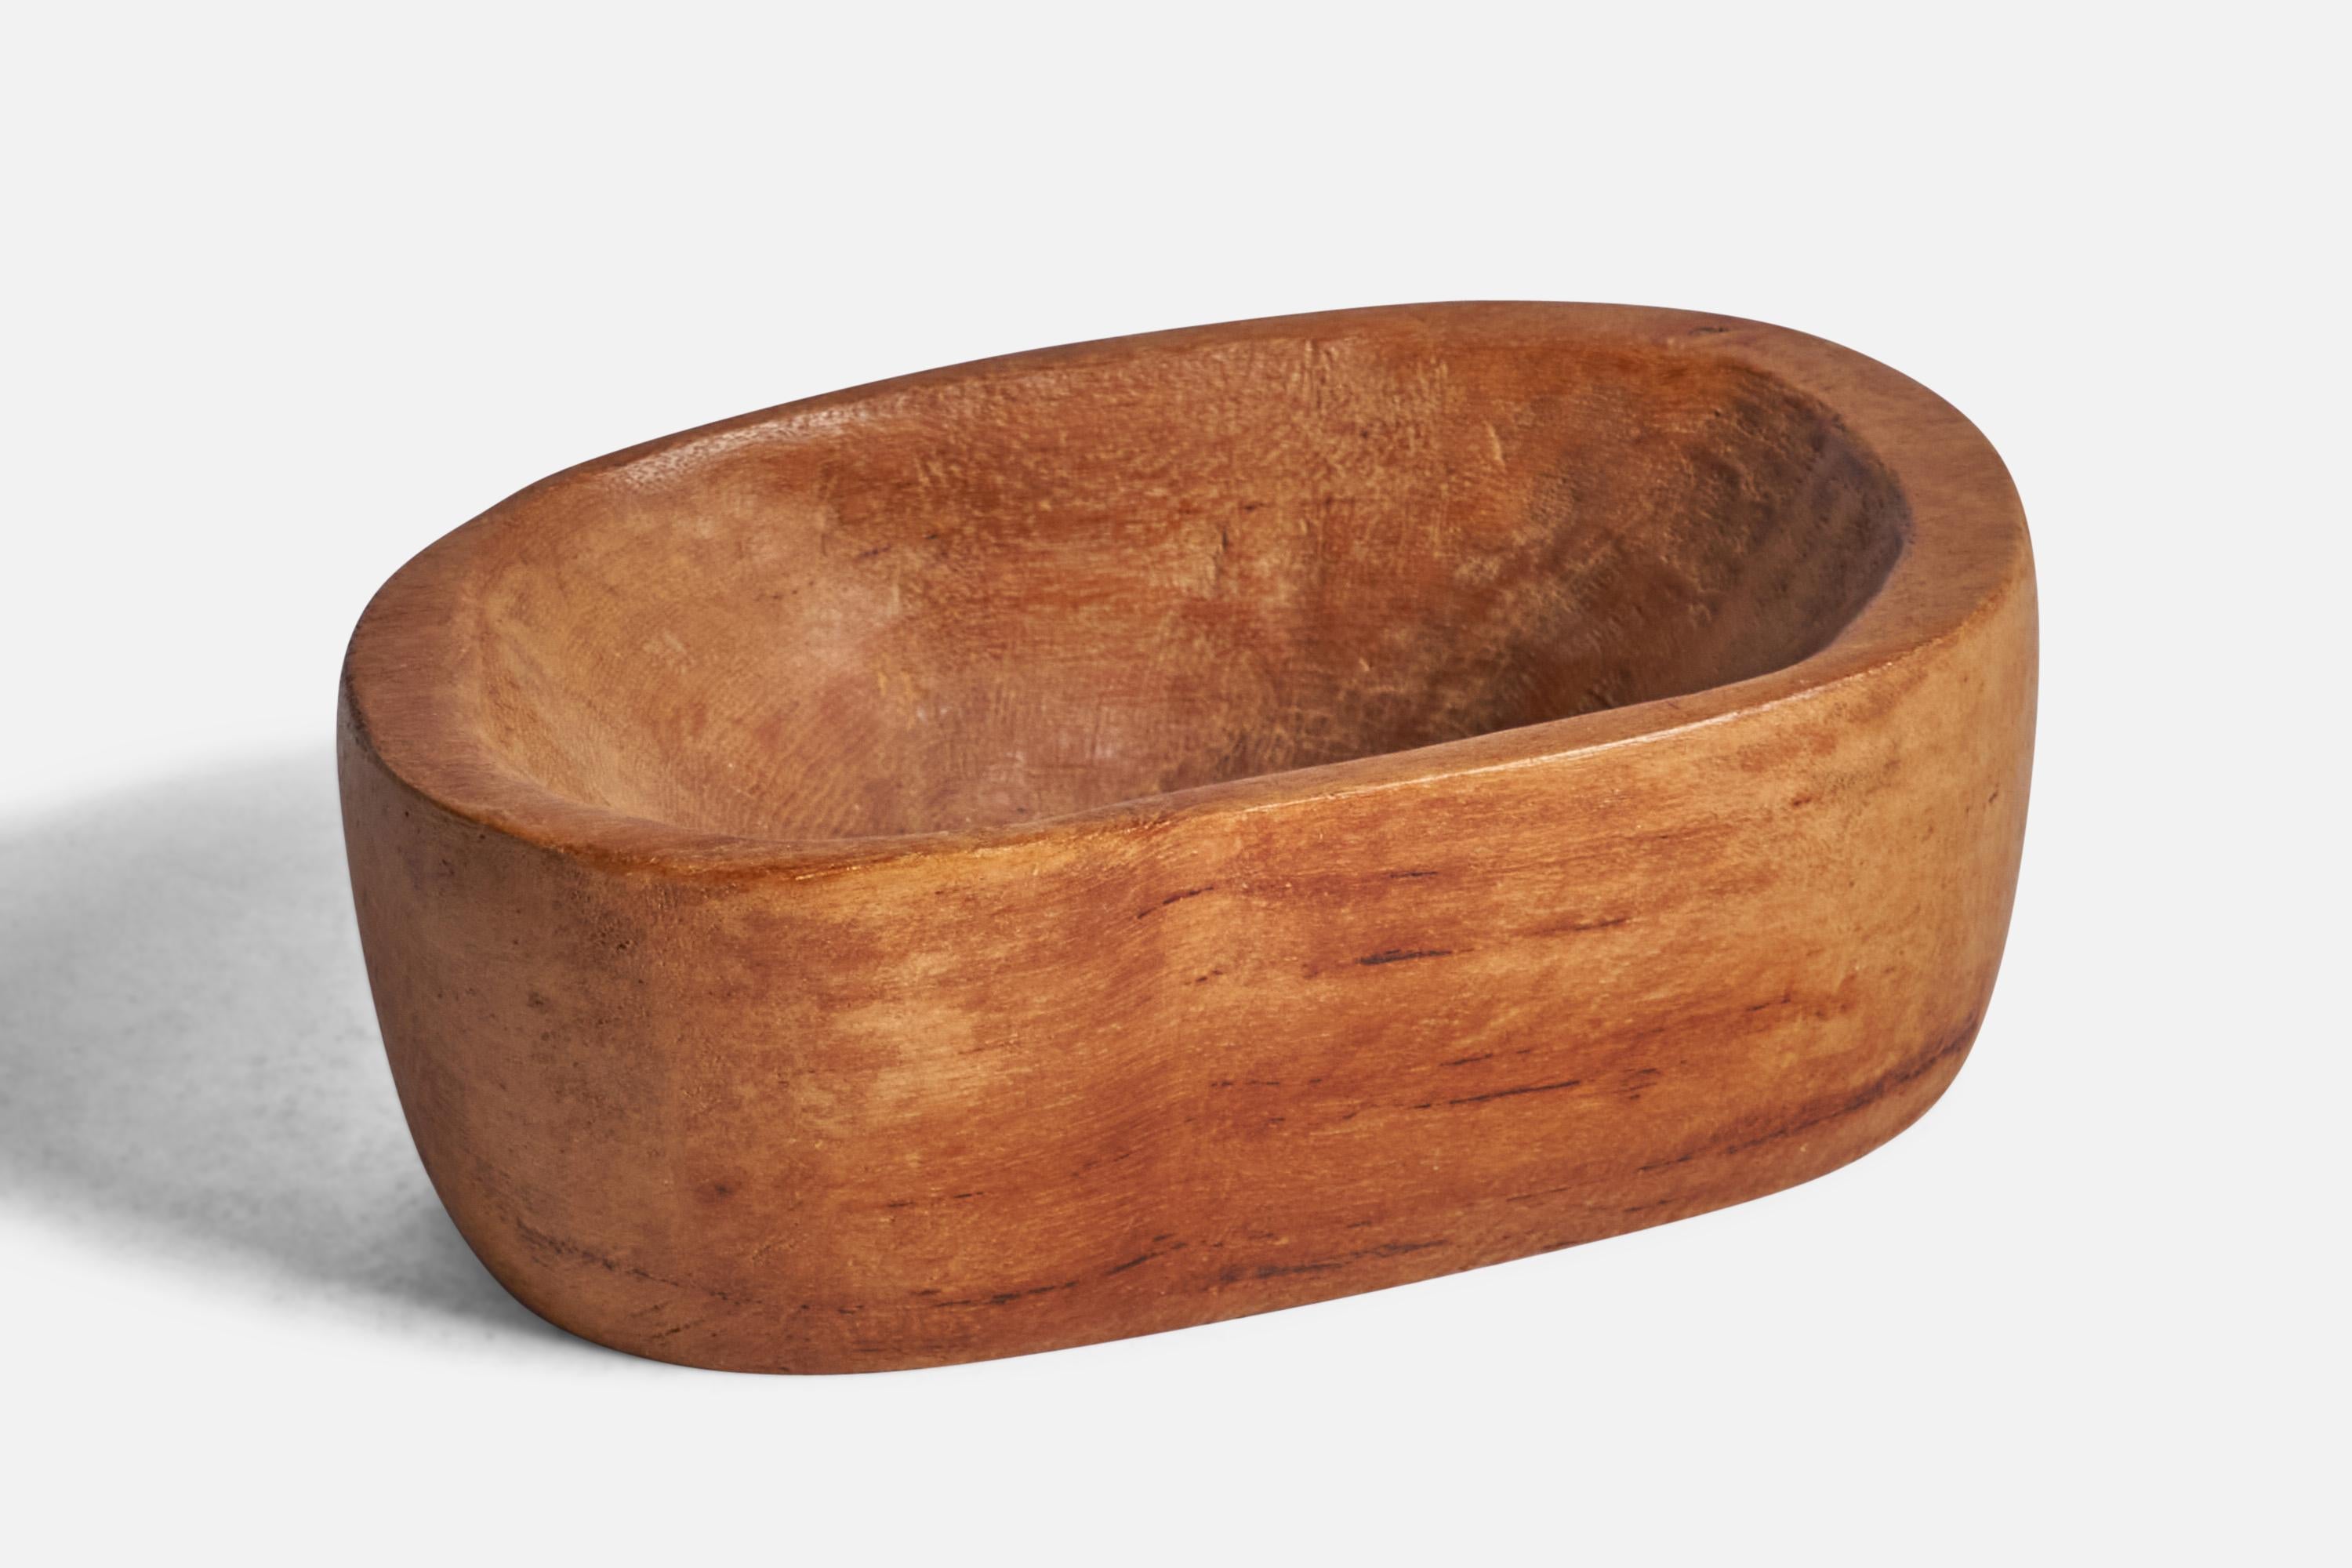 A small hand-carved bowl designed and produced in Sweden, c. 1940s.